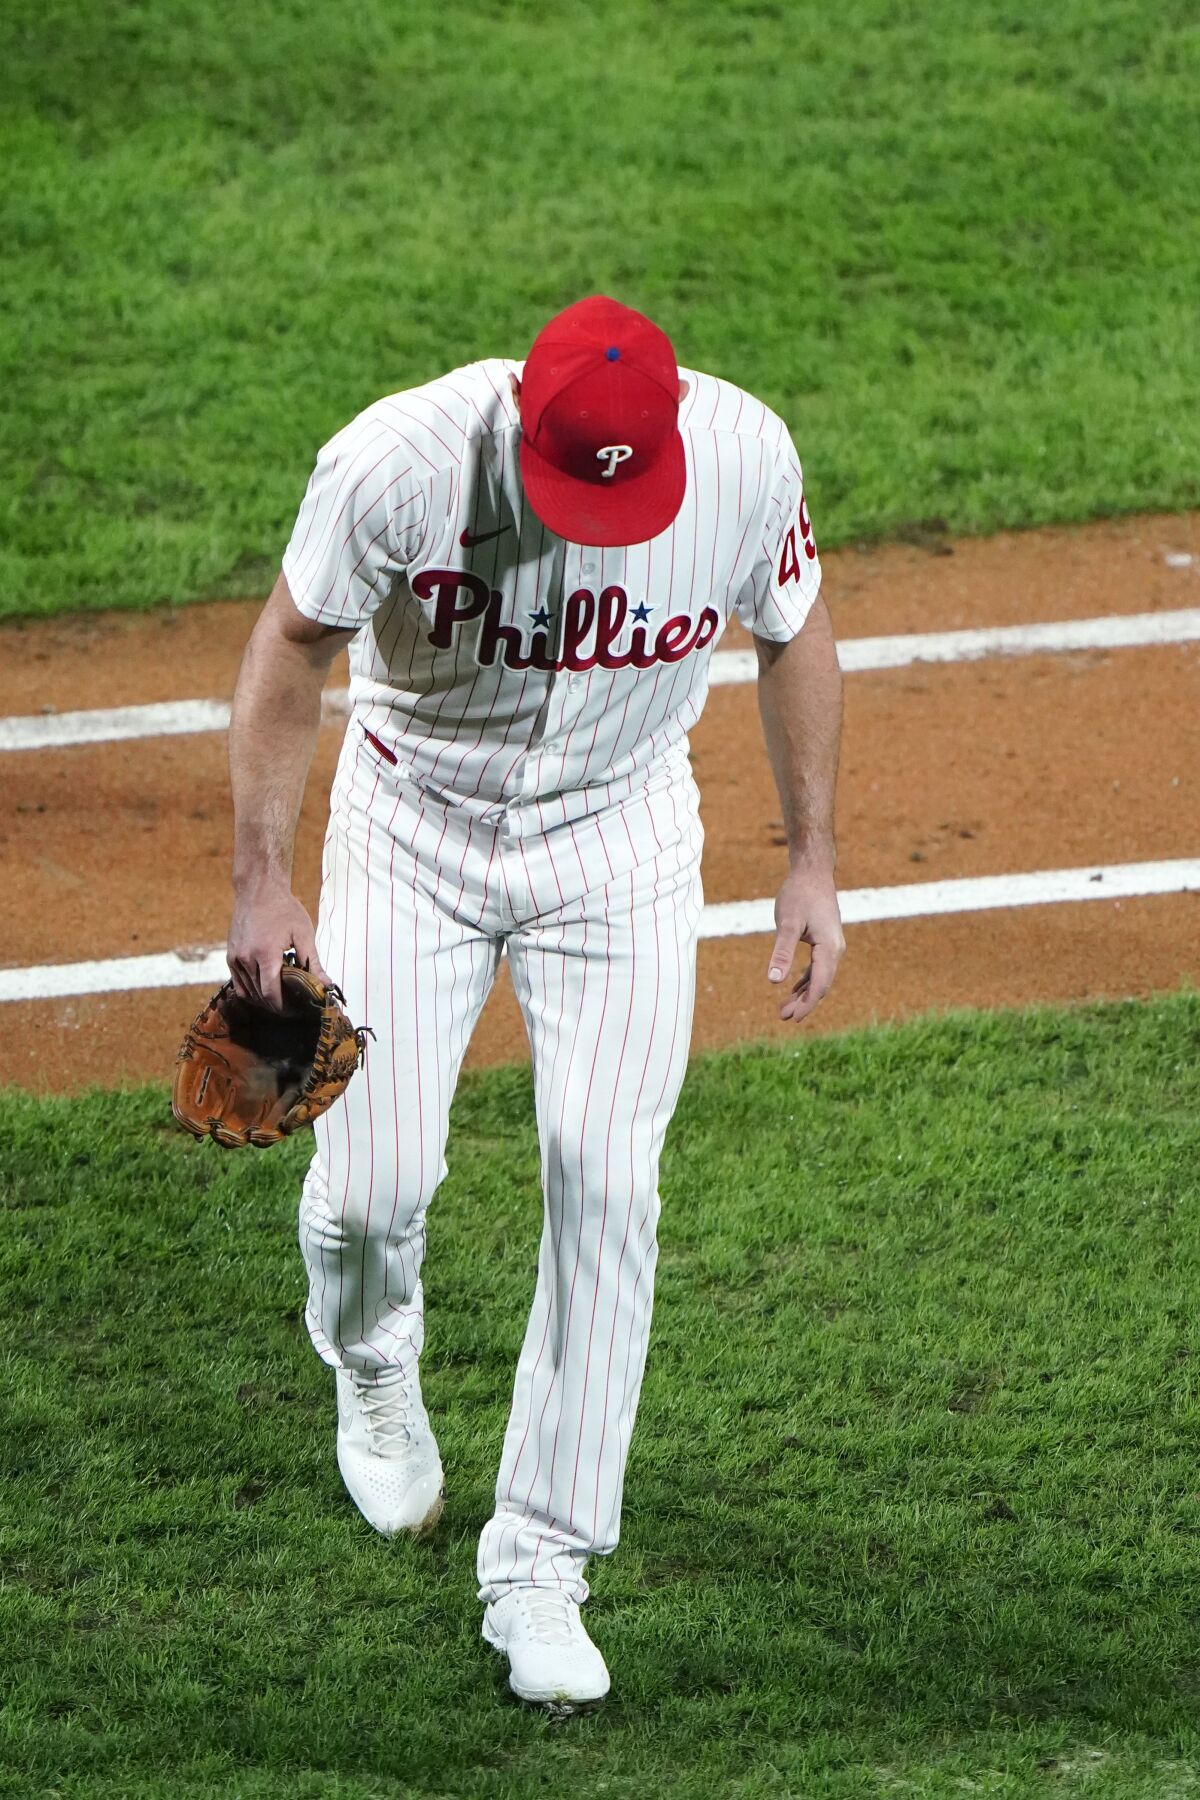 Philadelphia Phillies pitcher Jake Arrieta walks to the dugout after an injury during the sixth inning of a baseball game against the New York Mets, Tuesday, Sept. 15, 2020, in Philadelphia. (AP Photo/Matt Slocum)